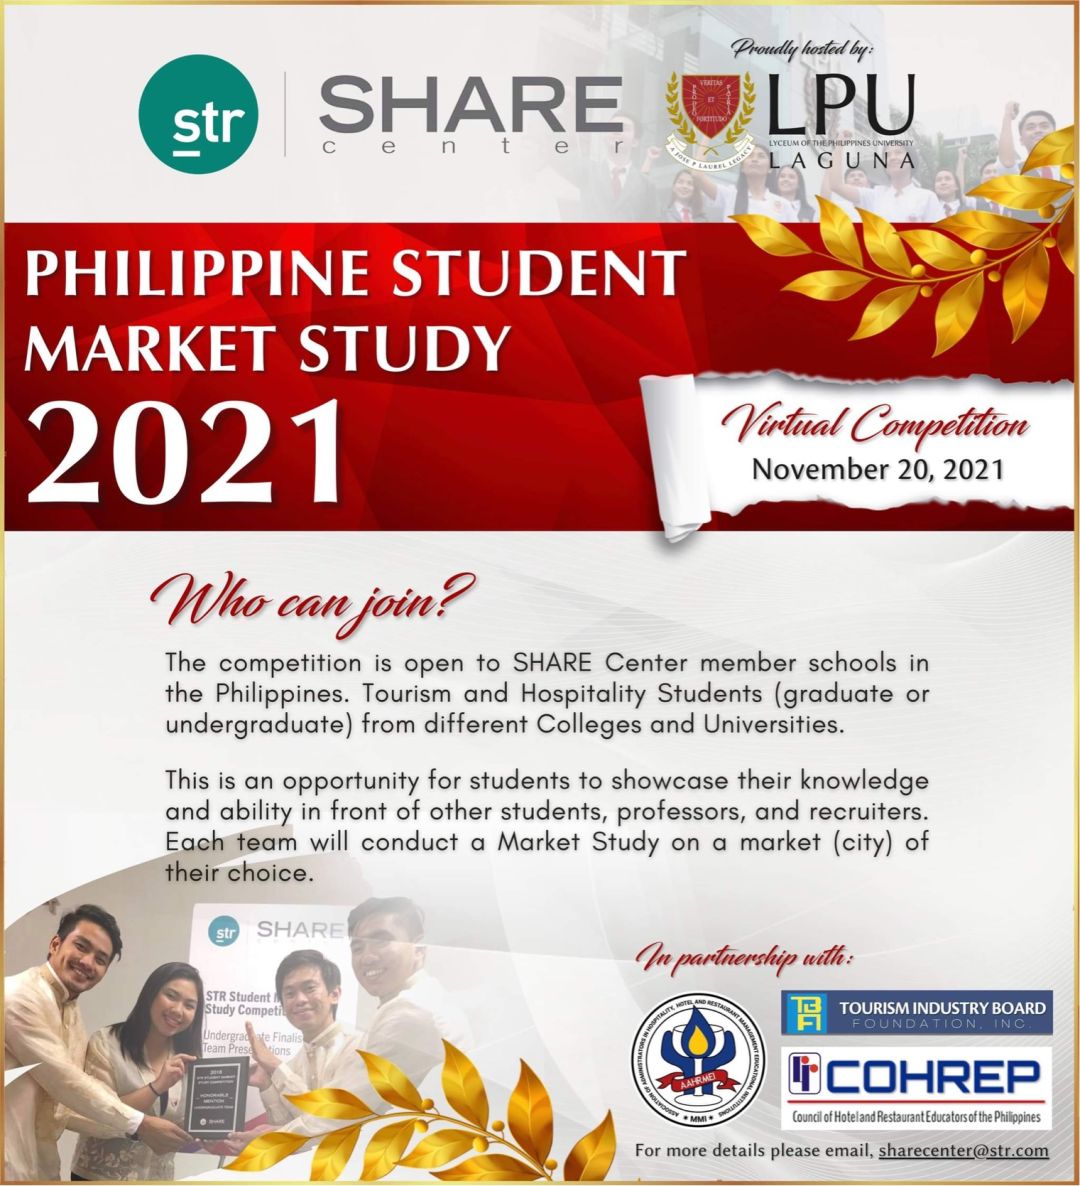 2021 Philippine Student Market Study Competition Proudly Hosted by LPU-Laguna